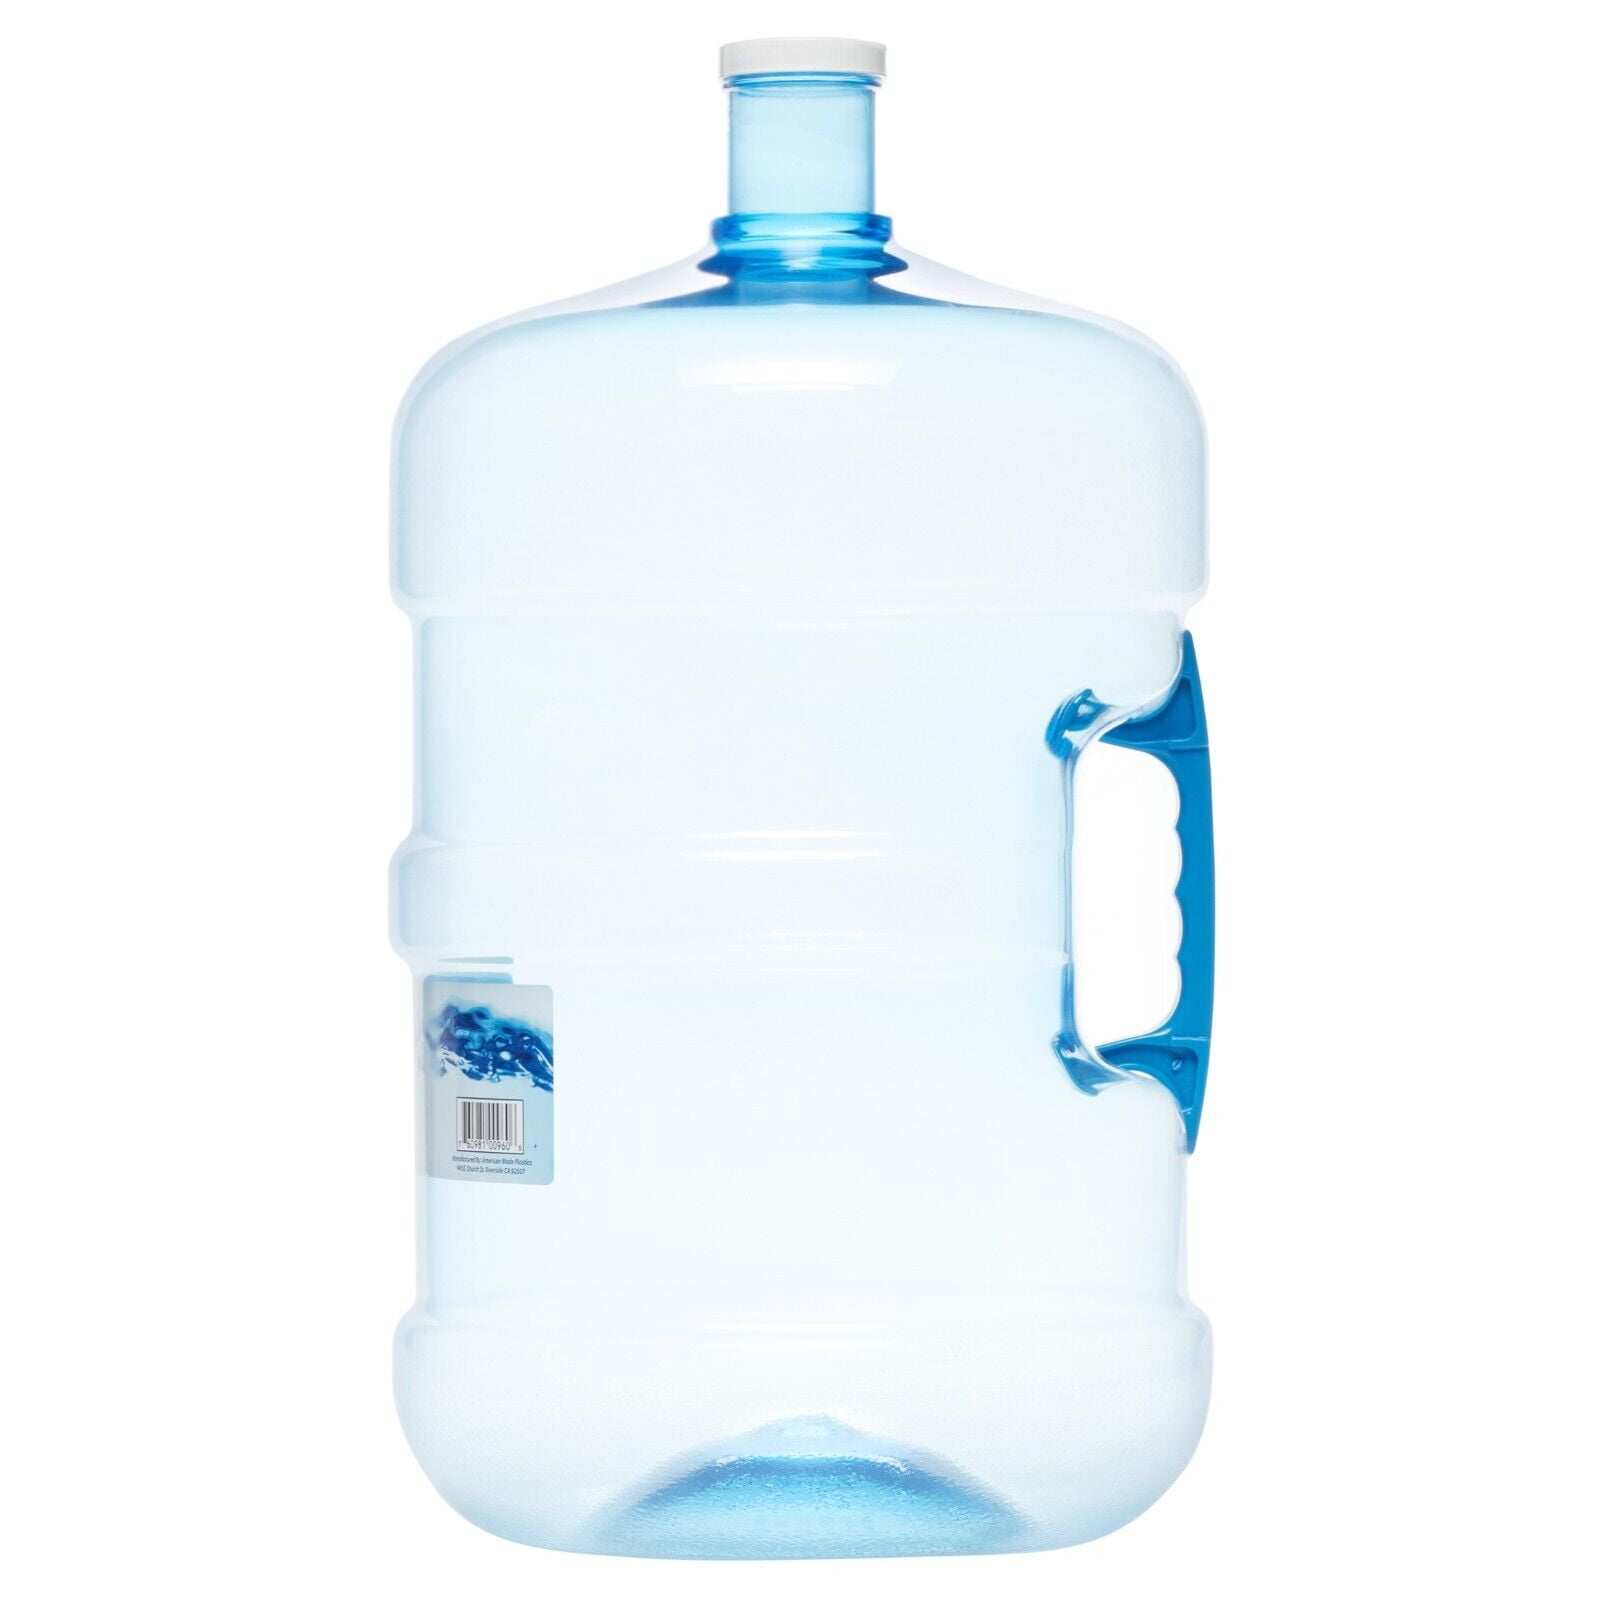 PureAqua BPA-Free Reusable Plastic Water Bottle Jug Container, Easy Grip  Carry Handle, Sports Residential & Commercial Use, Camping 5 Gallon